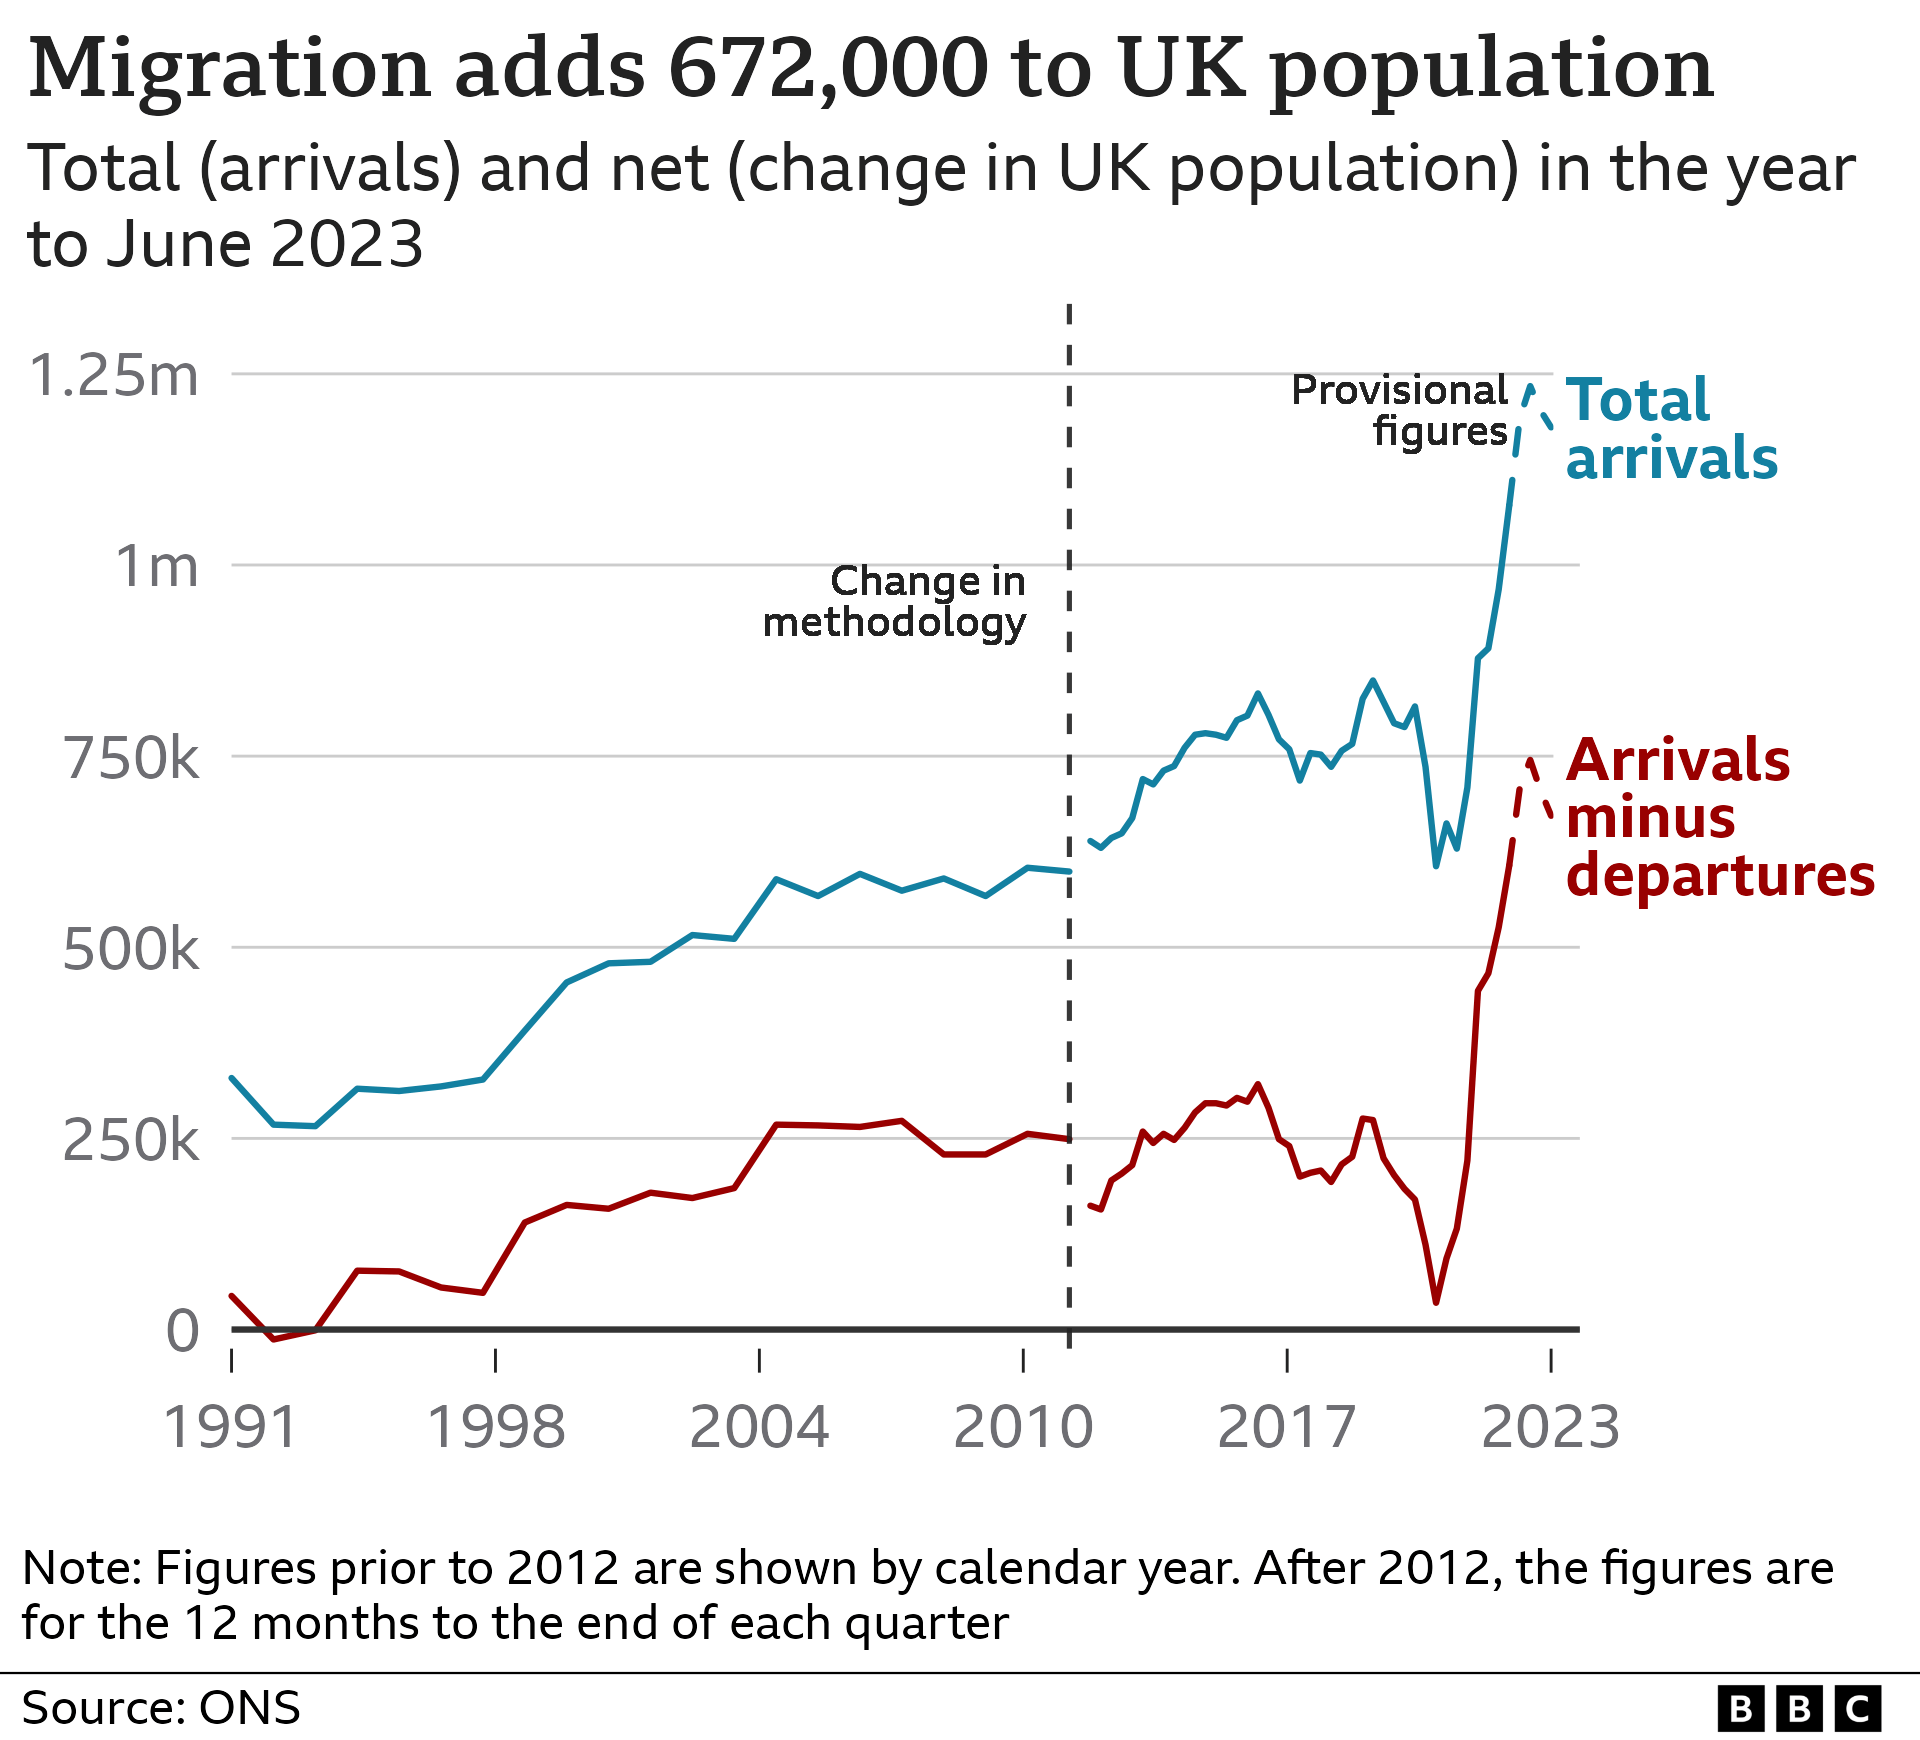 Graphic showing "total migrant arrivals" and "arrivals minus departures" from 1991 to 2023